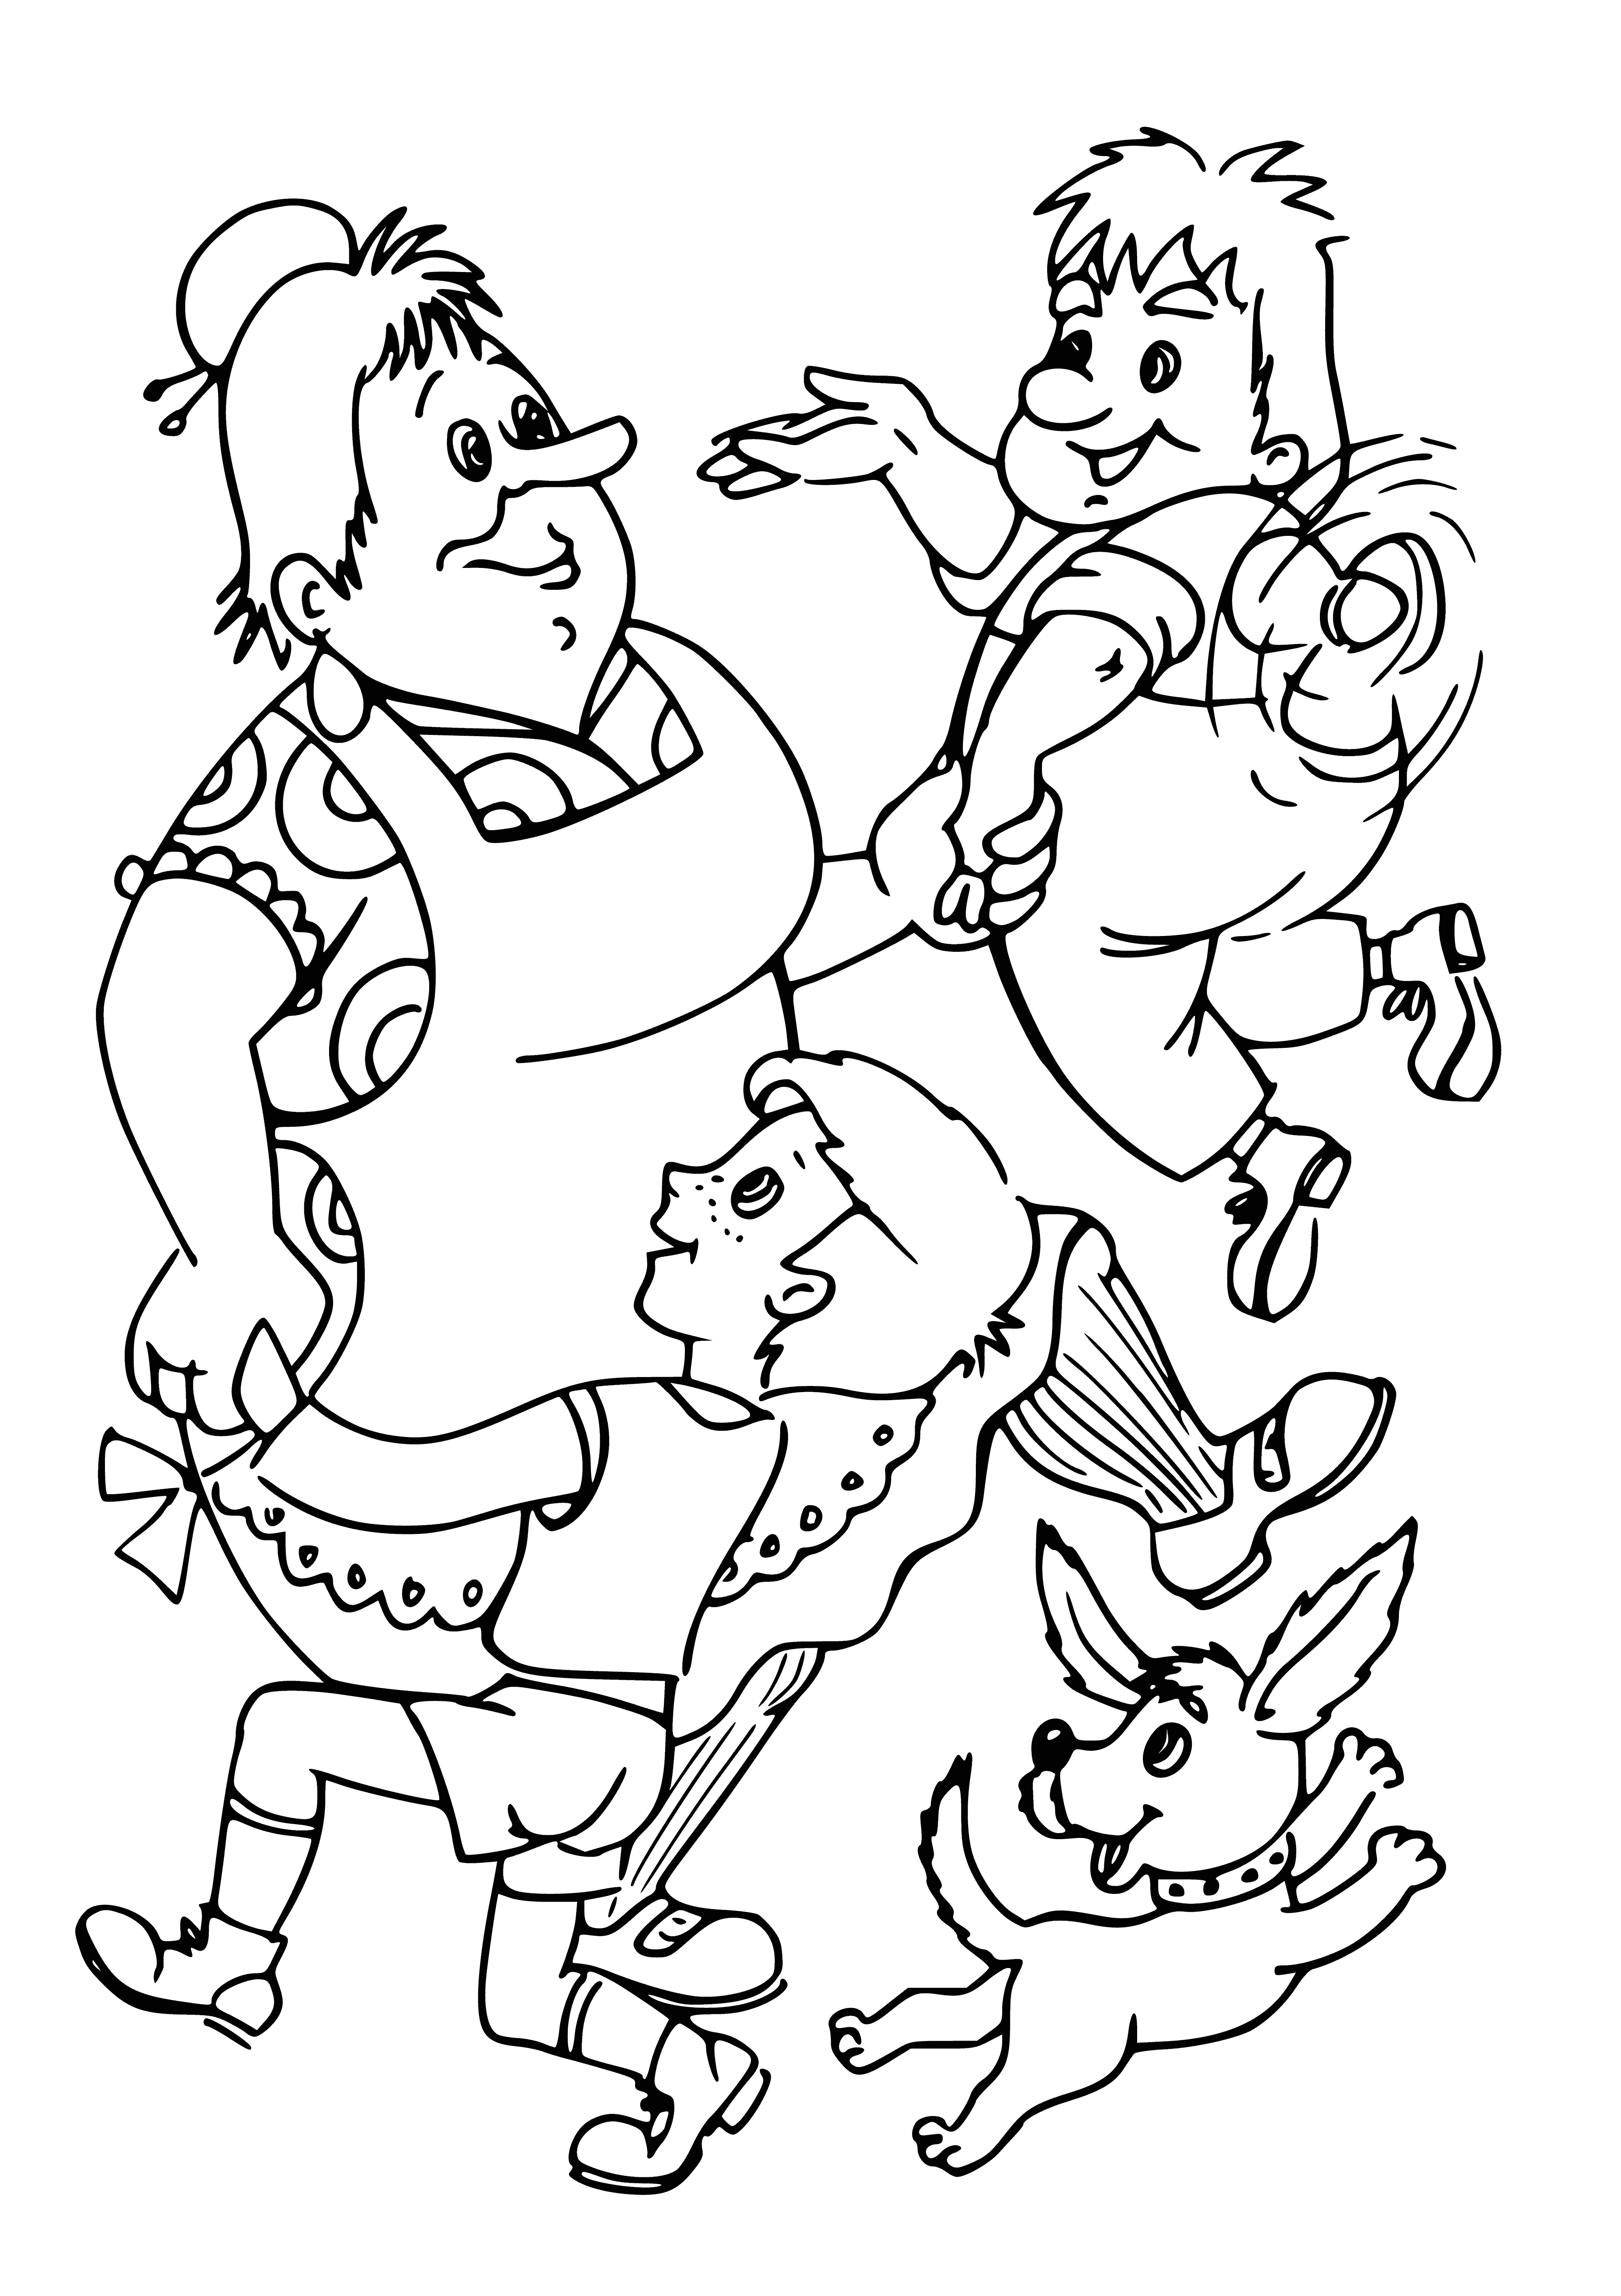 coloring page: Kid & Carlson are having fun together while sitting on the floor & chair- both with bright smiles!